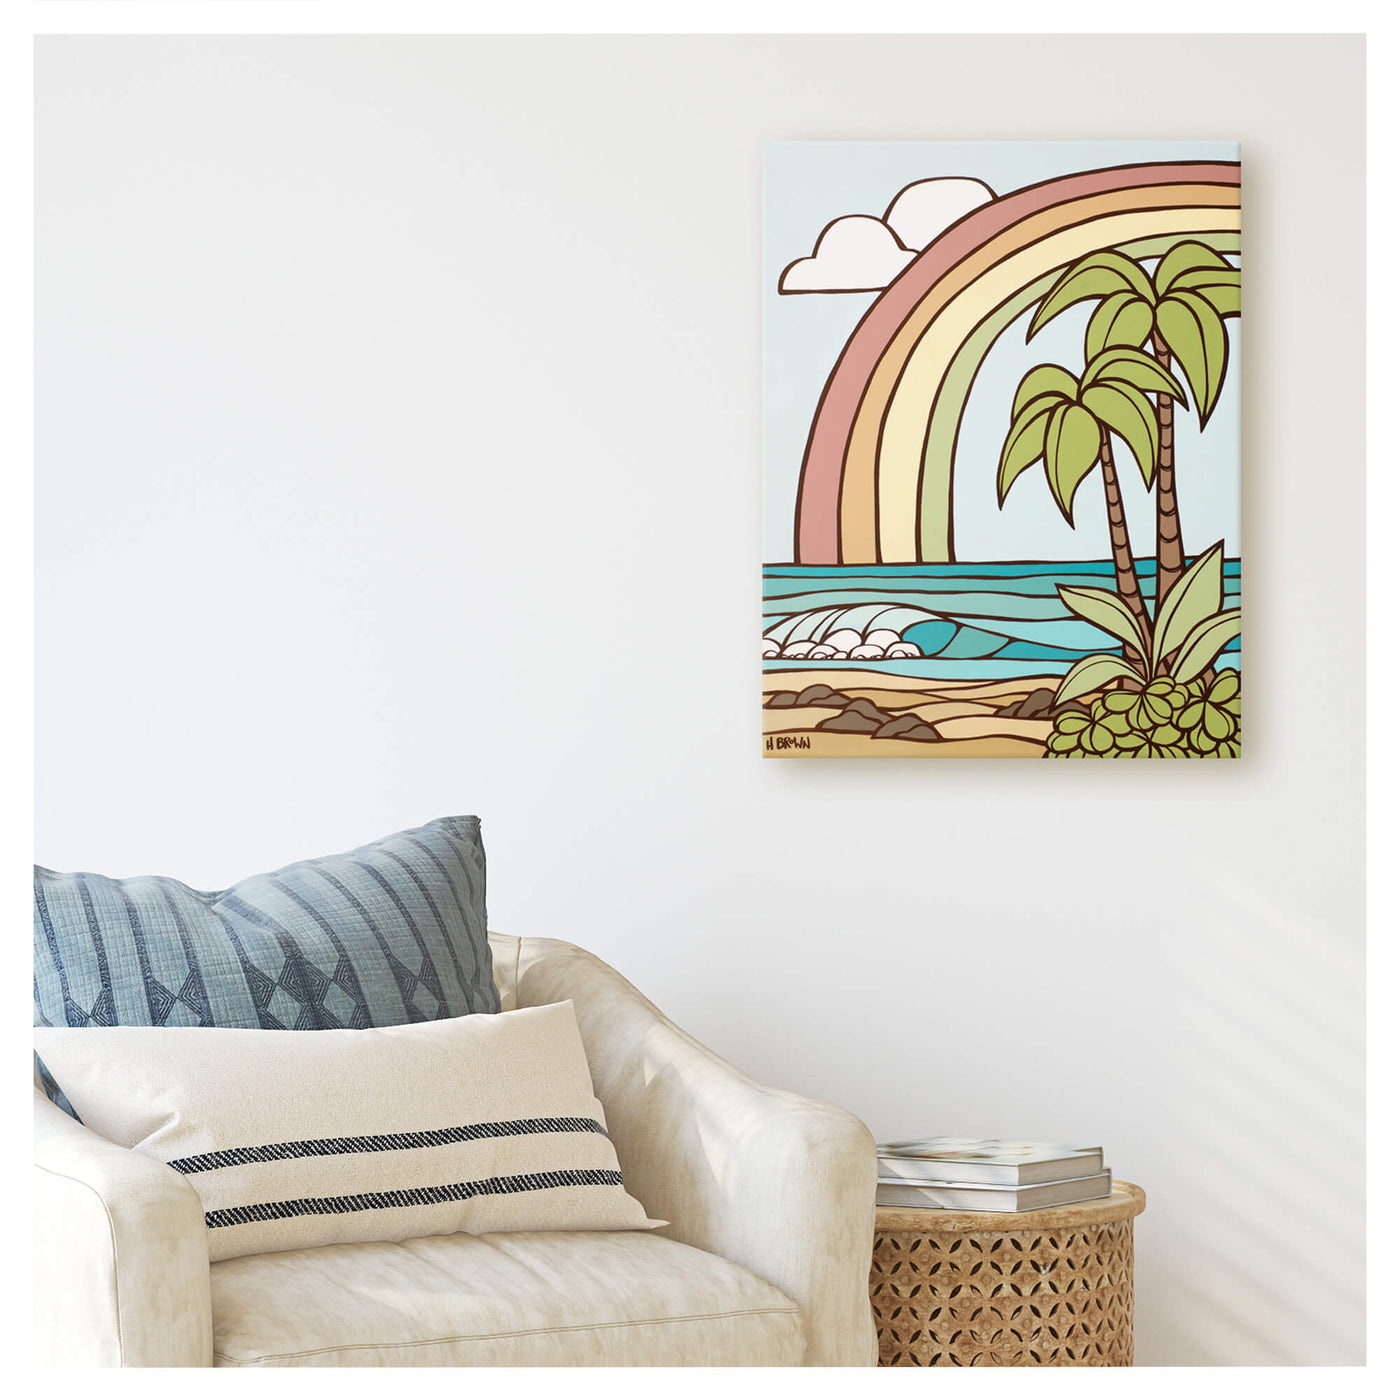 Pastel colored rainbow framing a classic Hawaii seascape by Hawaii surf artist Heather Brown